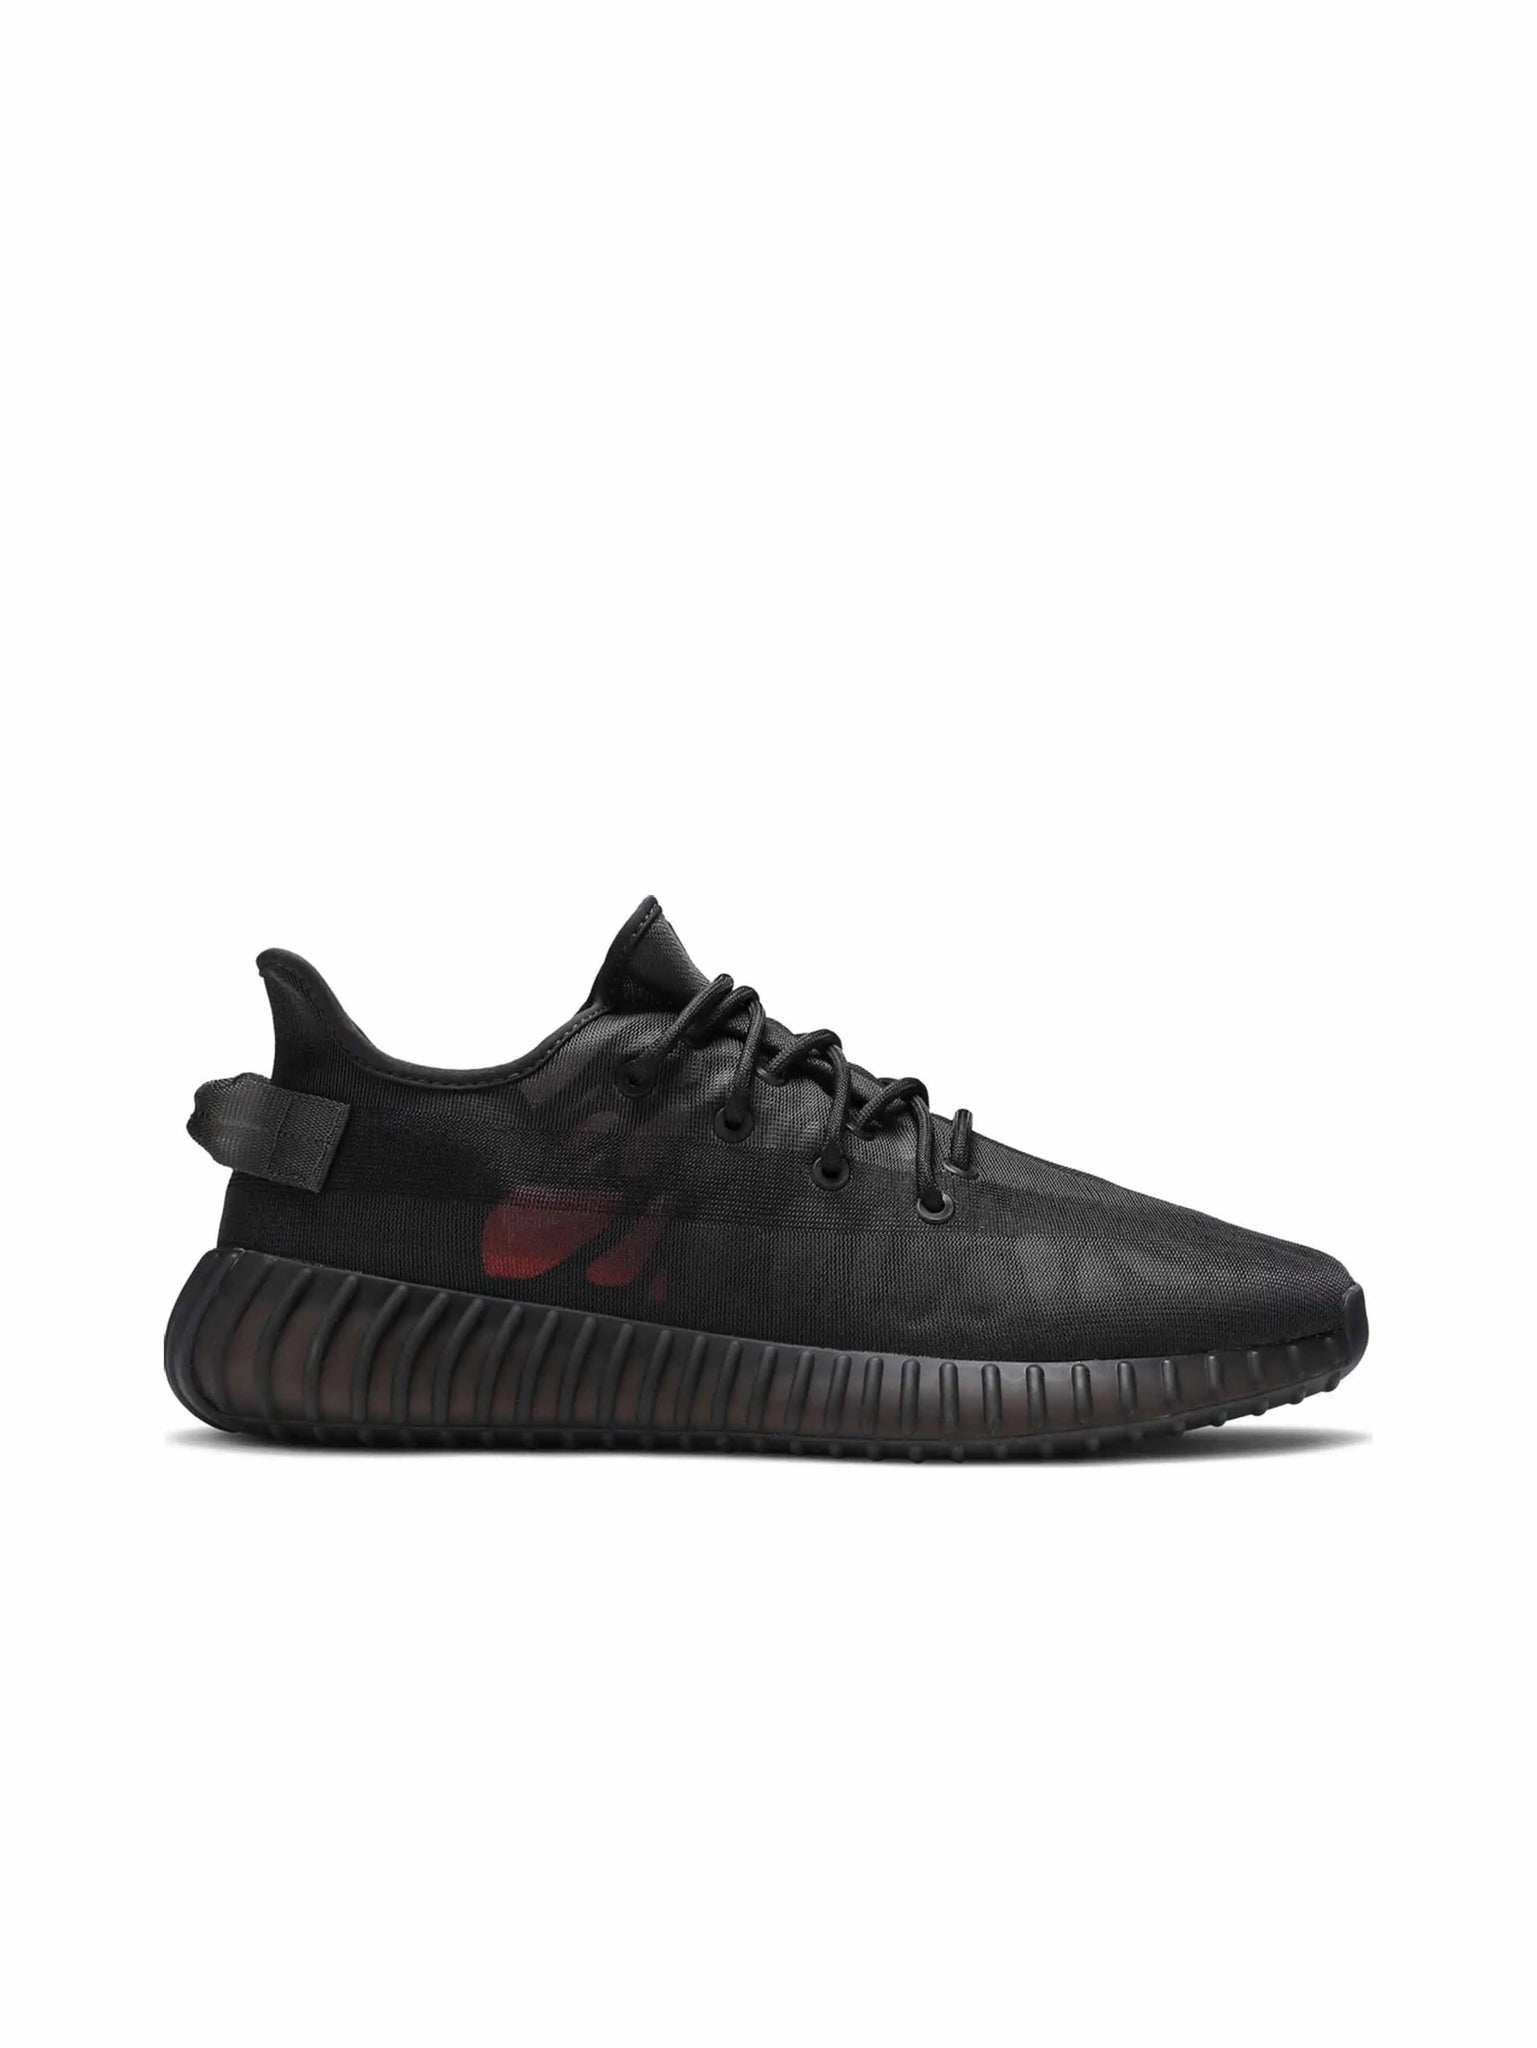 adidas Yeezy Boost 350 V2 Mono Cinder in Auckland, New Zealand - Shop name